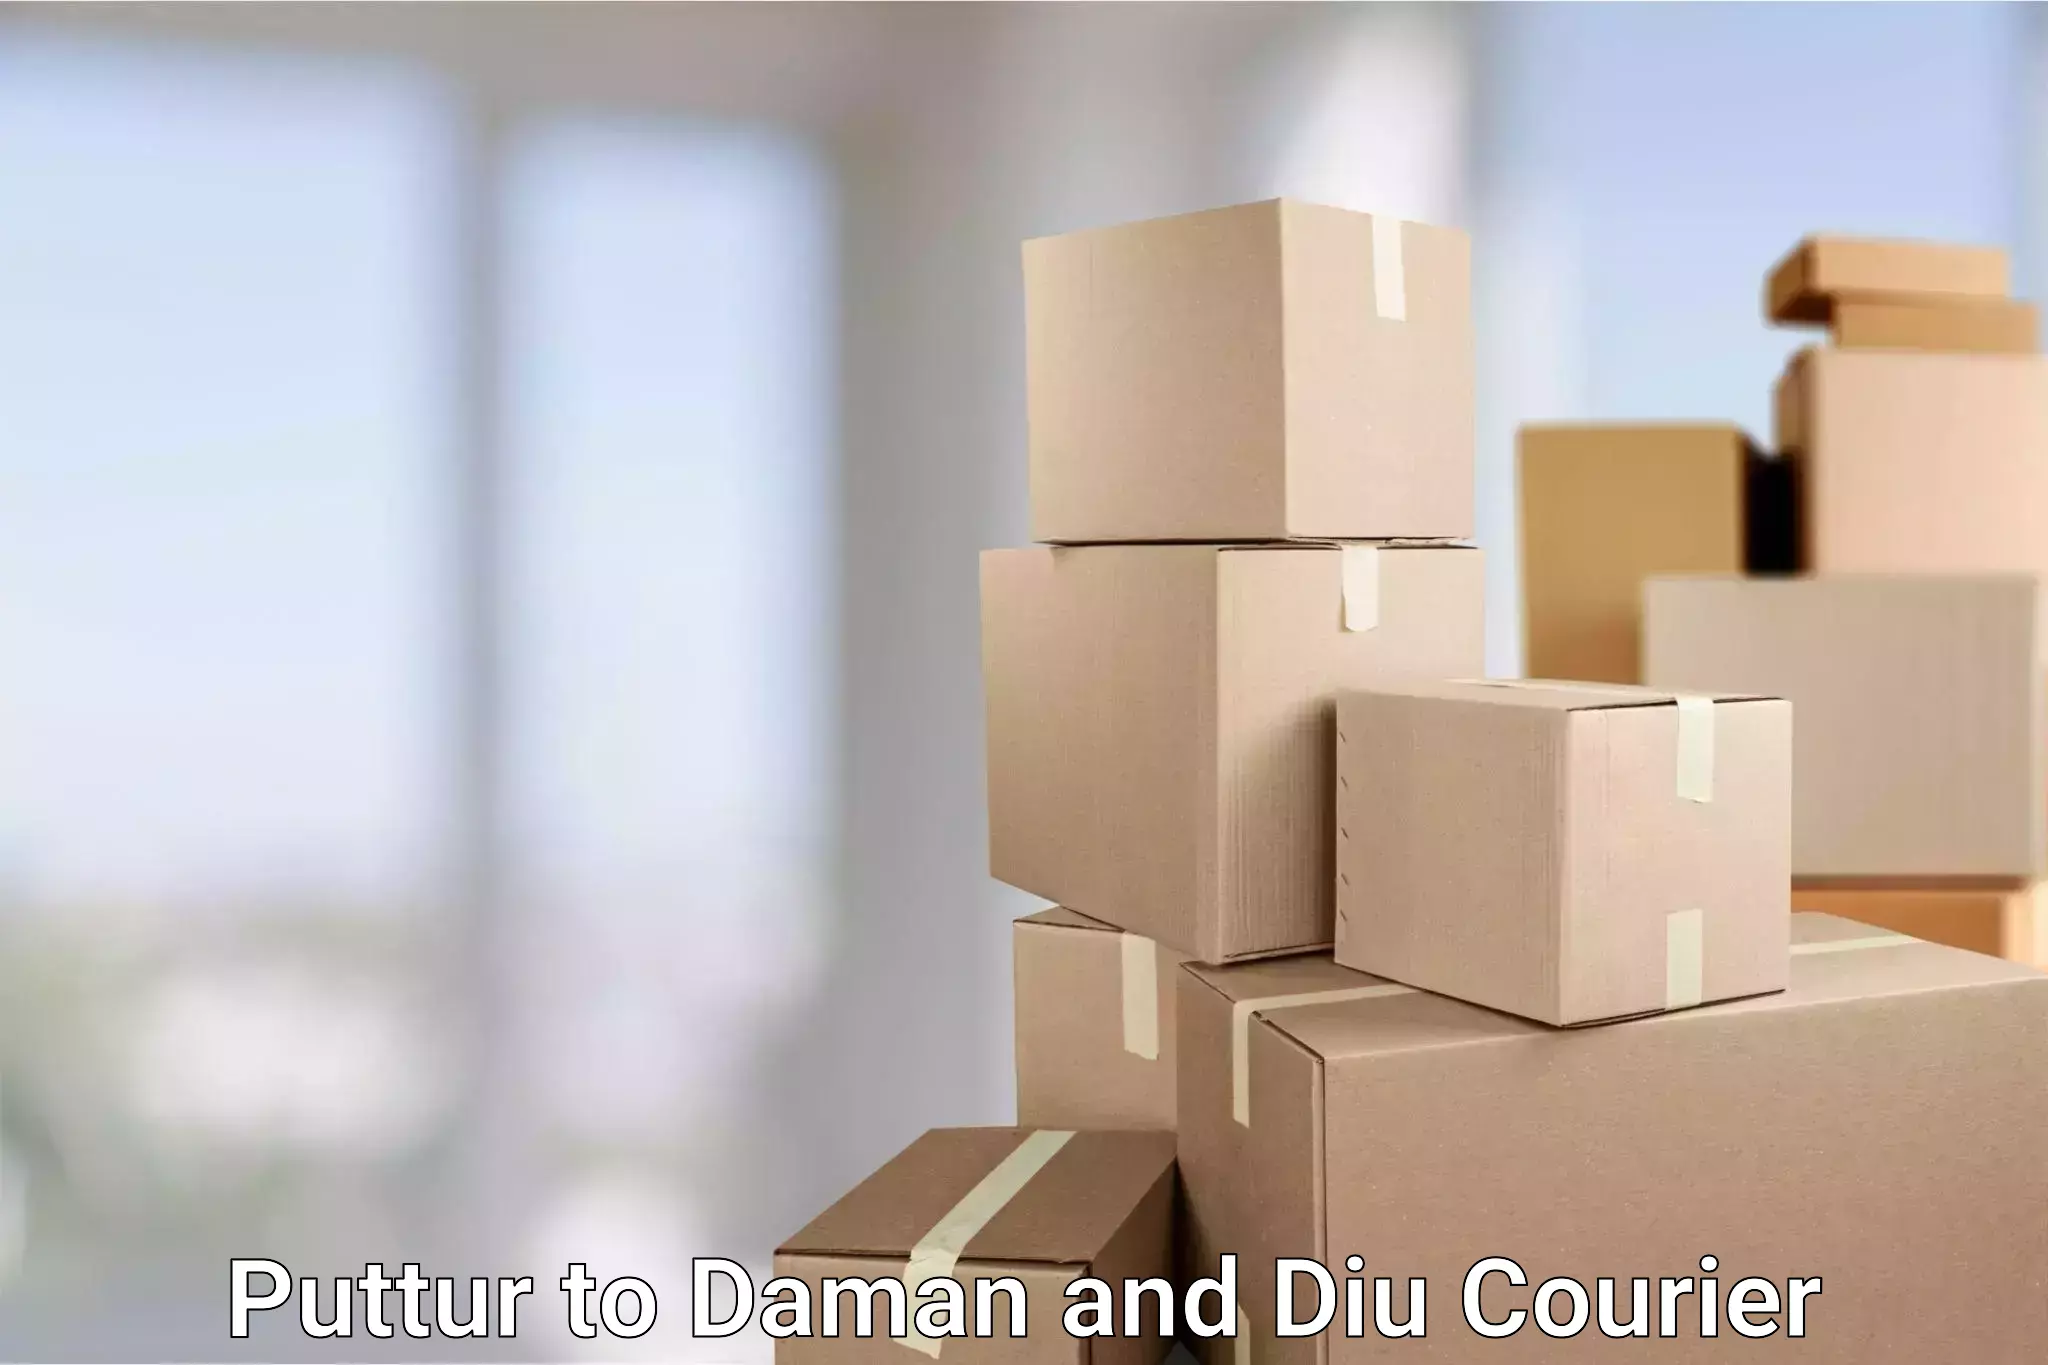 Nationwide courier service Puttur to Daman and Diu